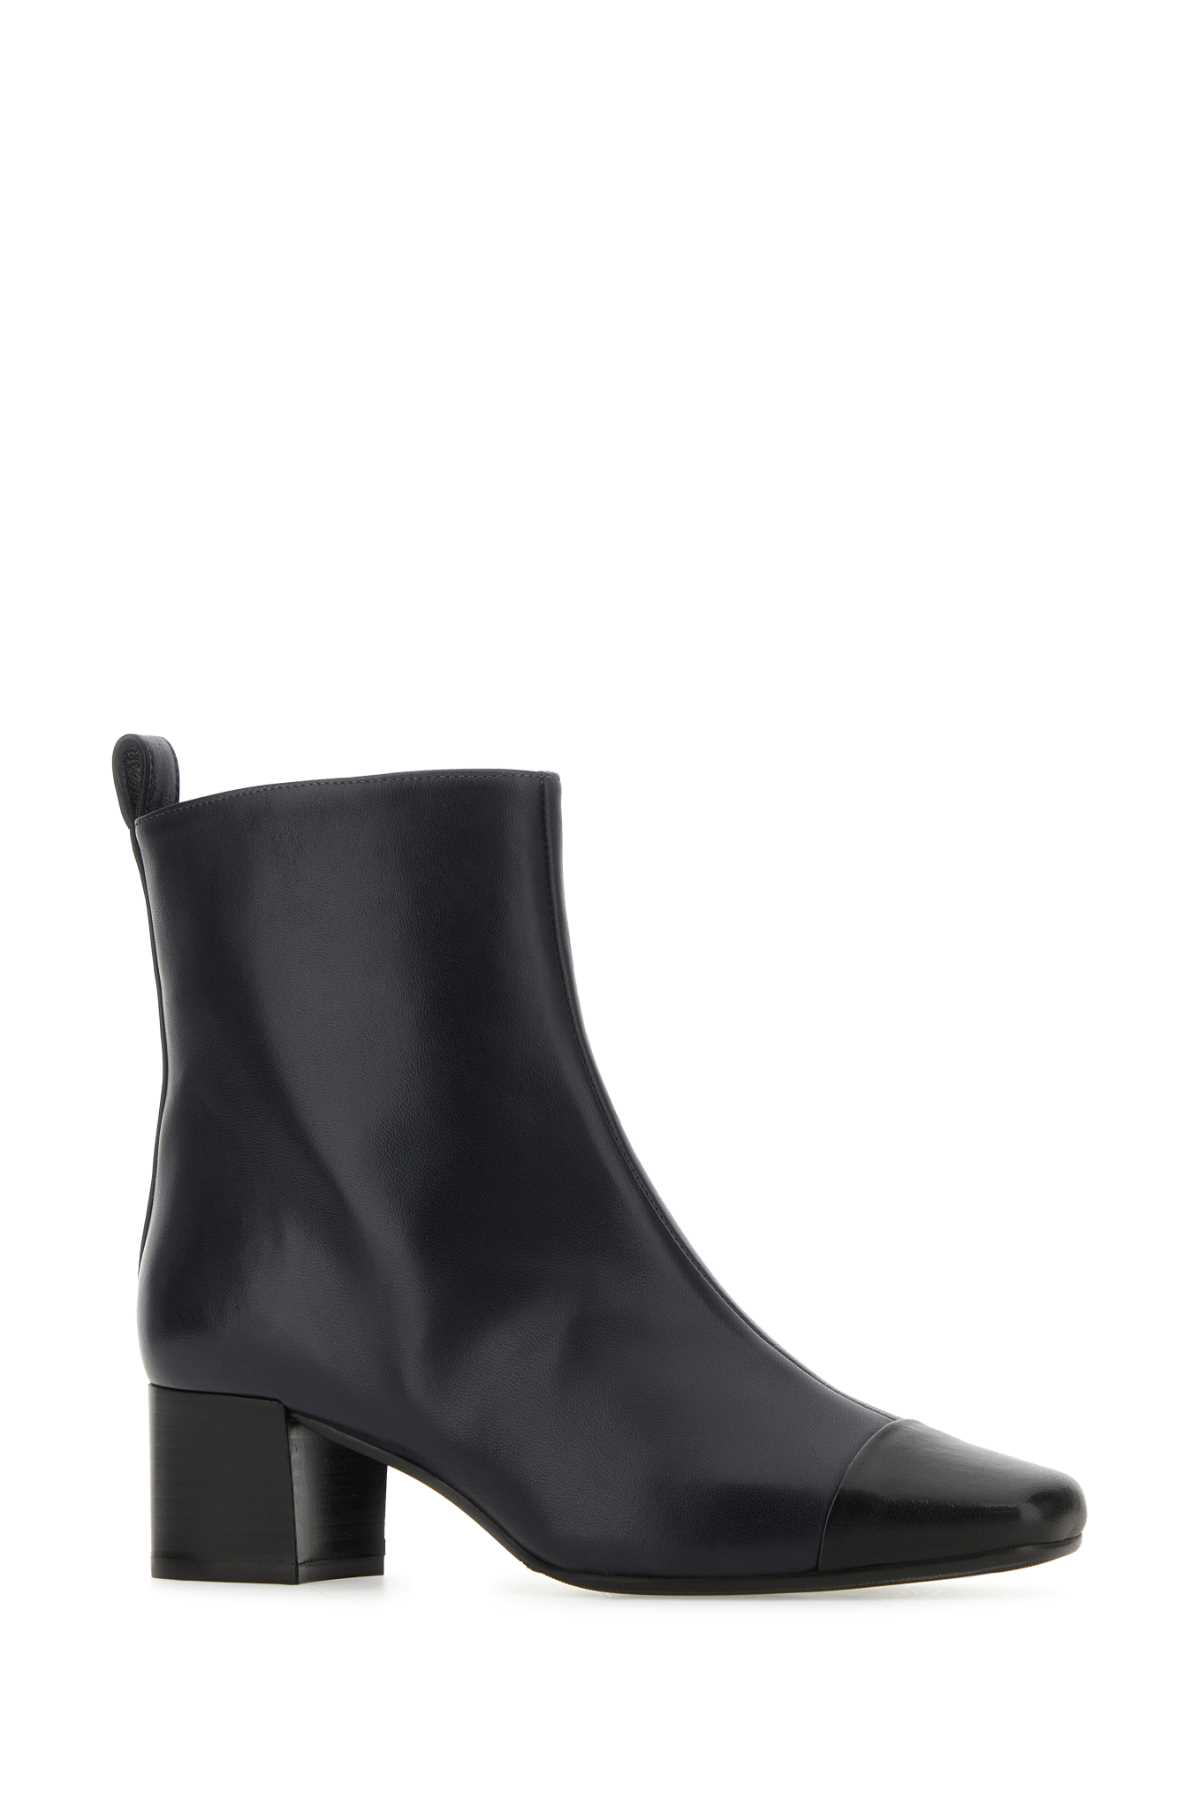 CAREL TWO-TONE LEATHER ESTIME ANKLE BOOTS